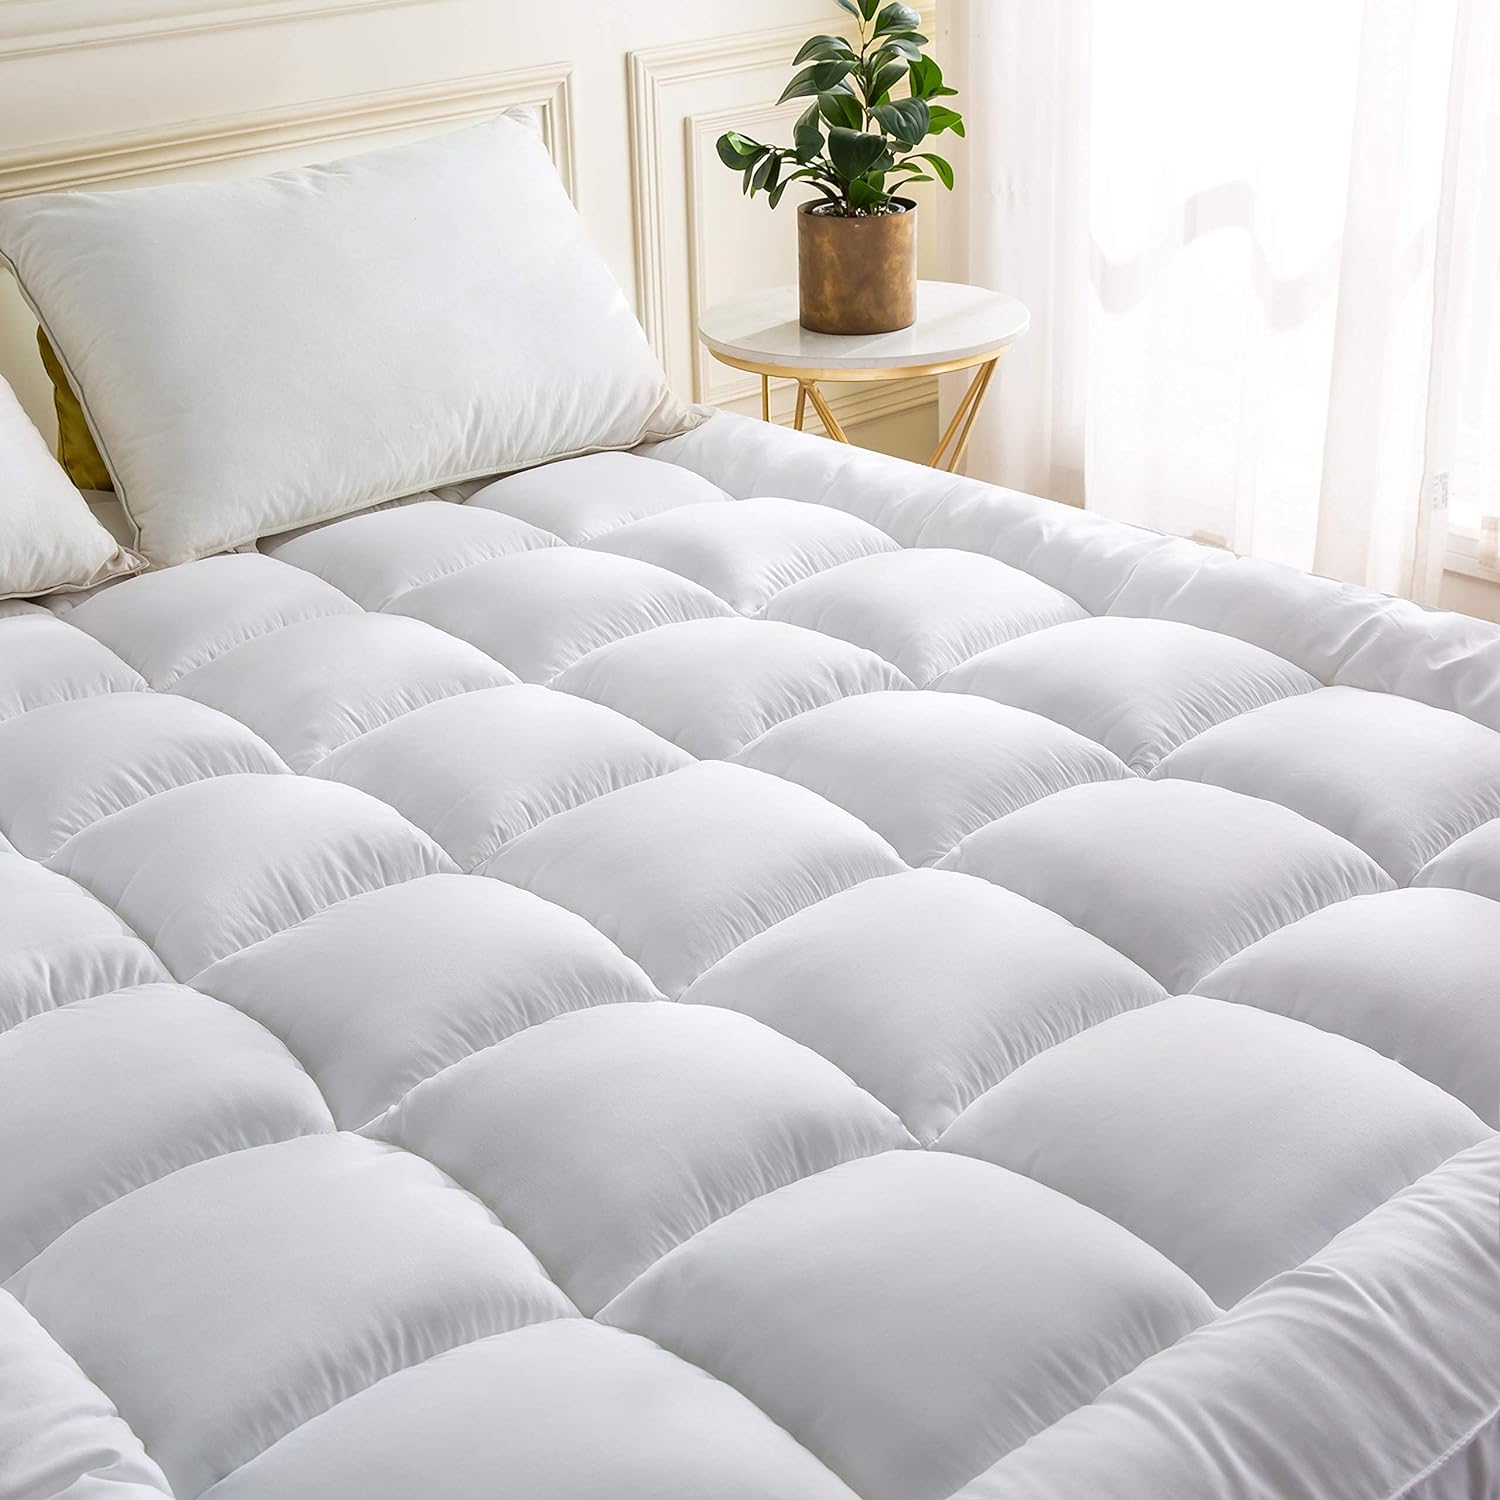 Extra Thick Air Flow Mattress Topper Twin Bed Size 2 Inches Highly Breathable Cooling Plush Dual Layer Fits 8-20inches Deep Pillow Top Super Soft Microfiber Down Alternative Fill